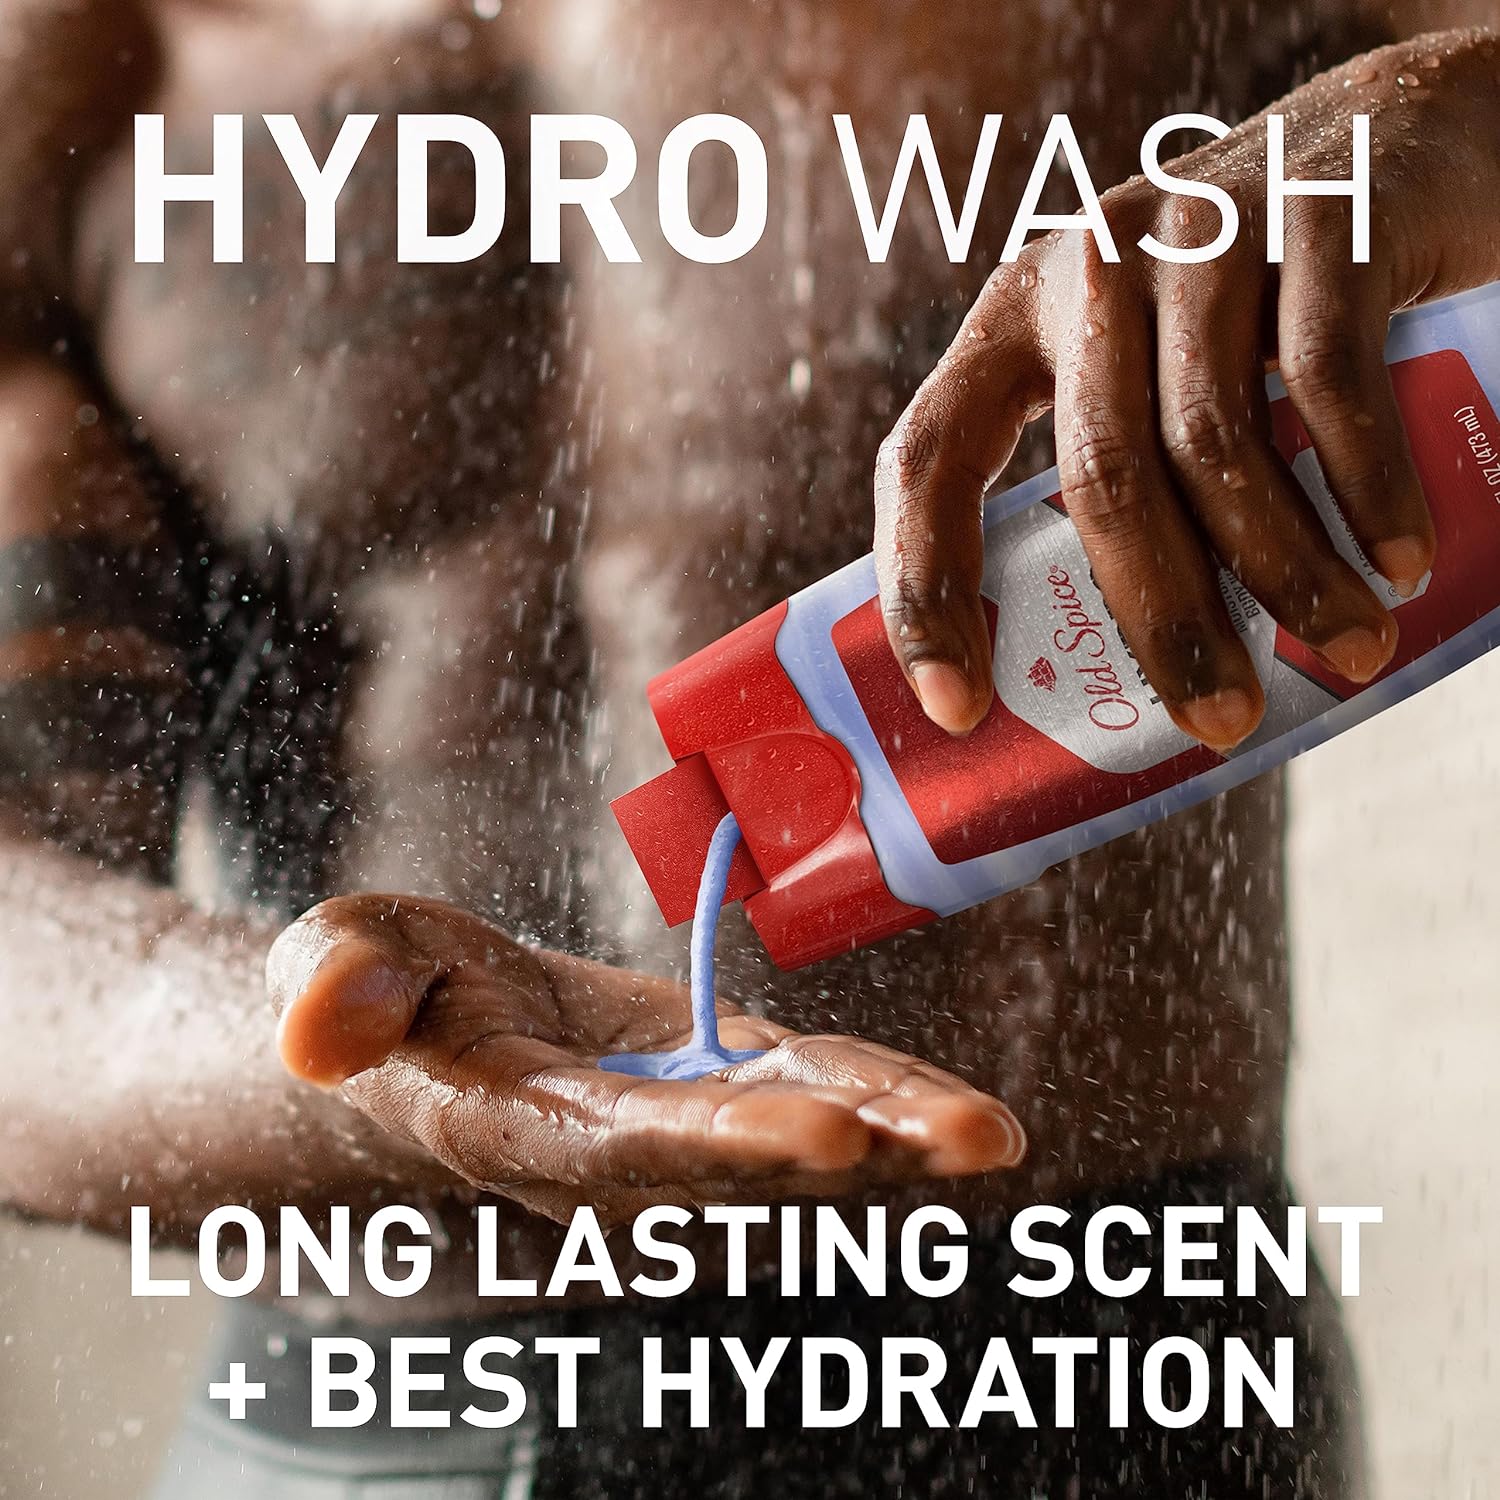 Old Spice Hydro Body Wash for Men